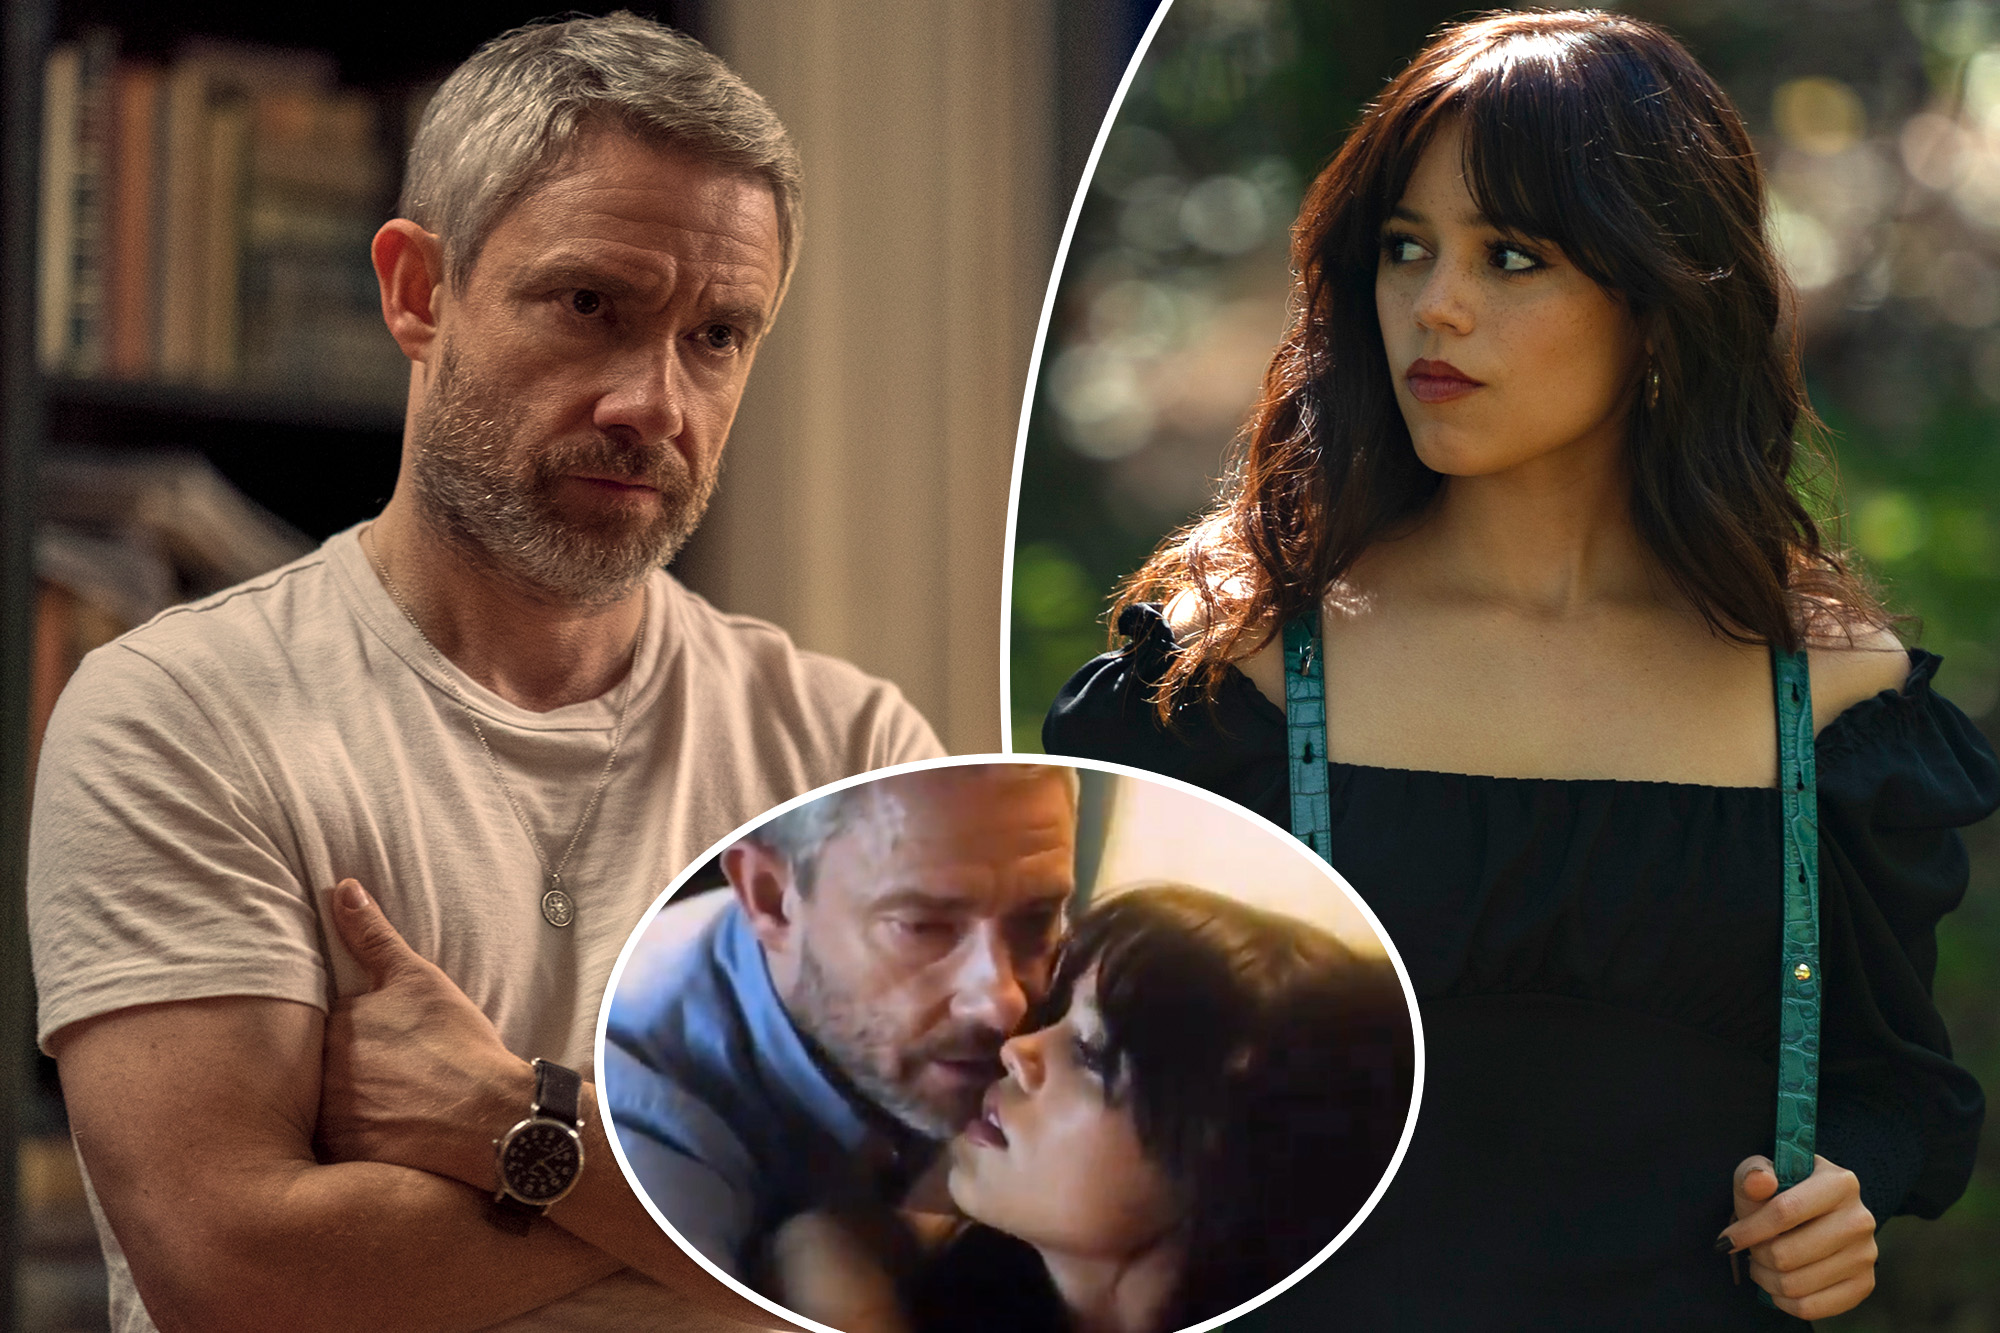 Martin Freeman, 52, reacts to backlash over ‘gross’ age gap with Jenna Ortega, 21, in ‘Miller’s Girl’